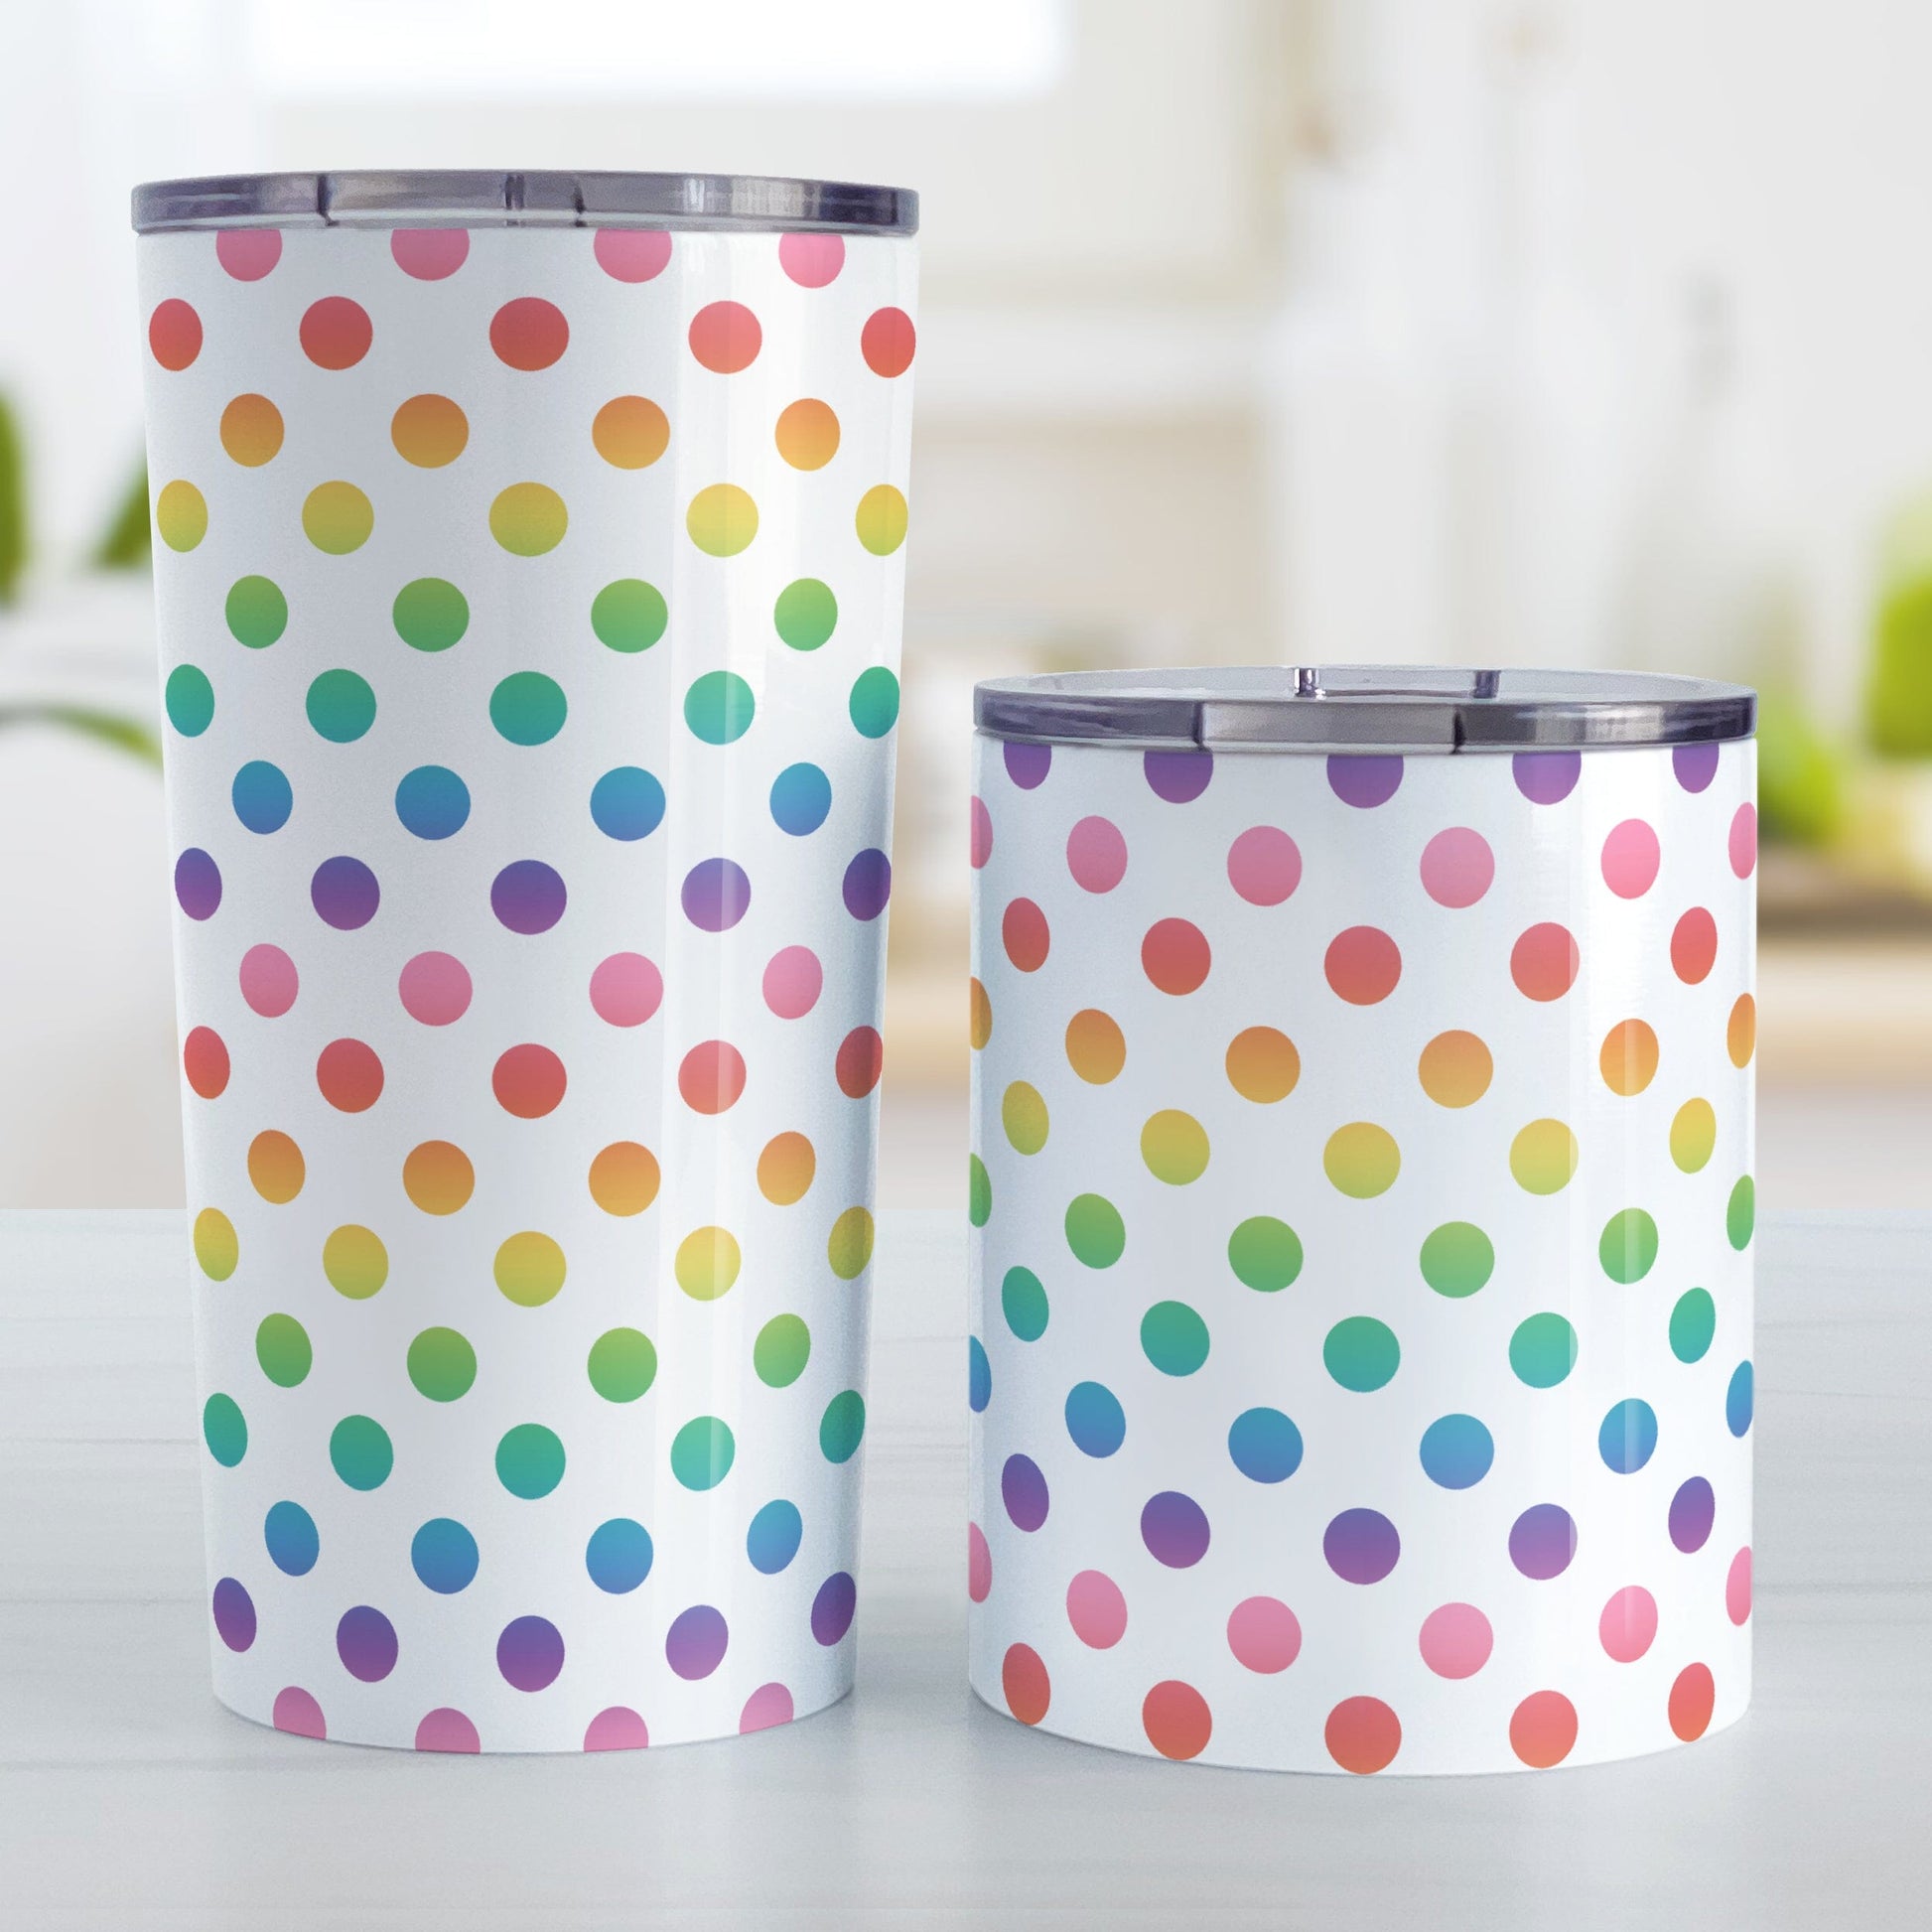 Rainbow Polka Dots Tumbler Cup (20oz or 10oz) at Amy's Coffee Mugs. Stainless steel tumbler cups designed with a colorful pattern of polka dots in a rainbow color progression that wraps around the cups. Photo shows both sized cups next to each other on a table.